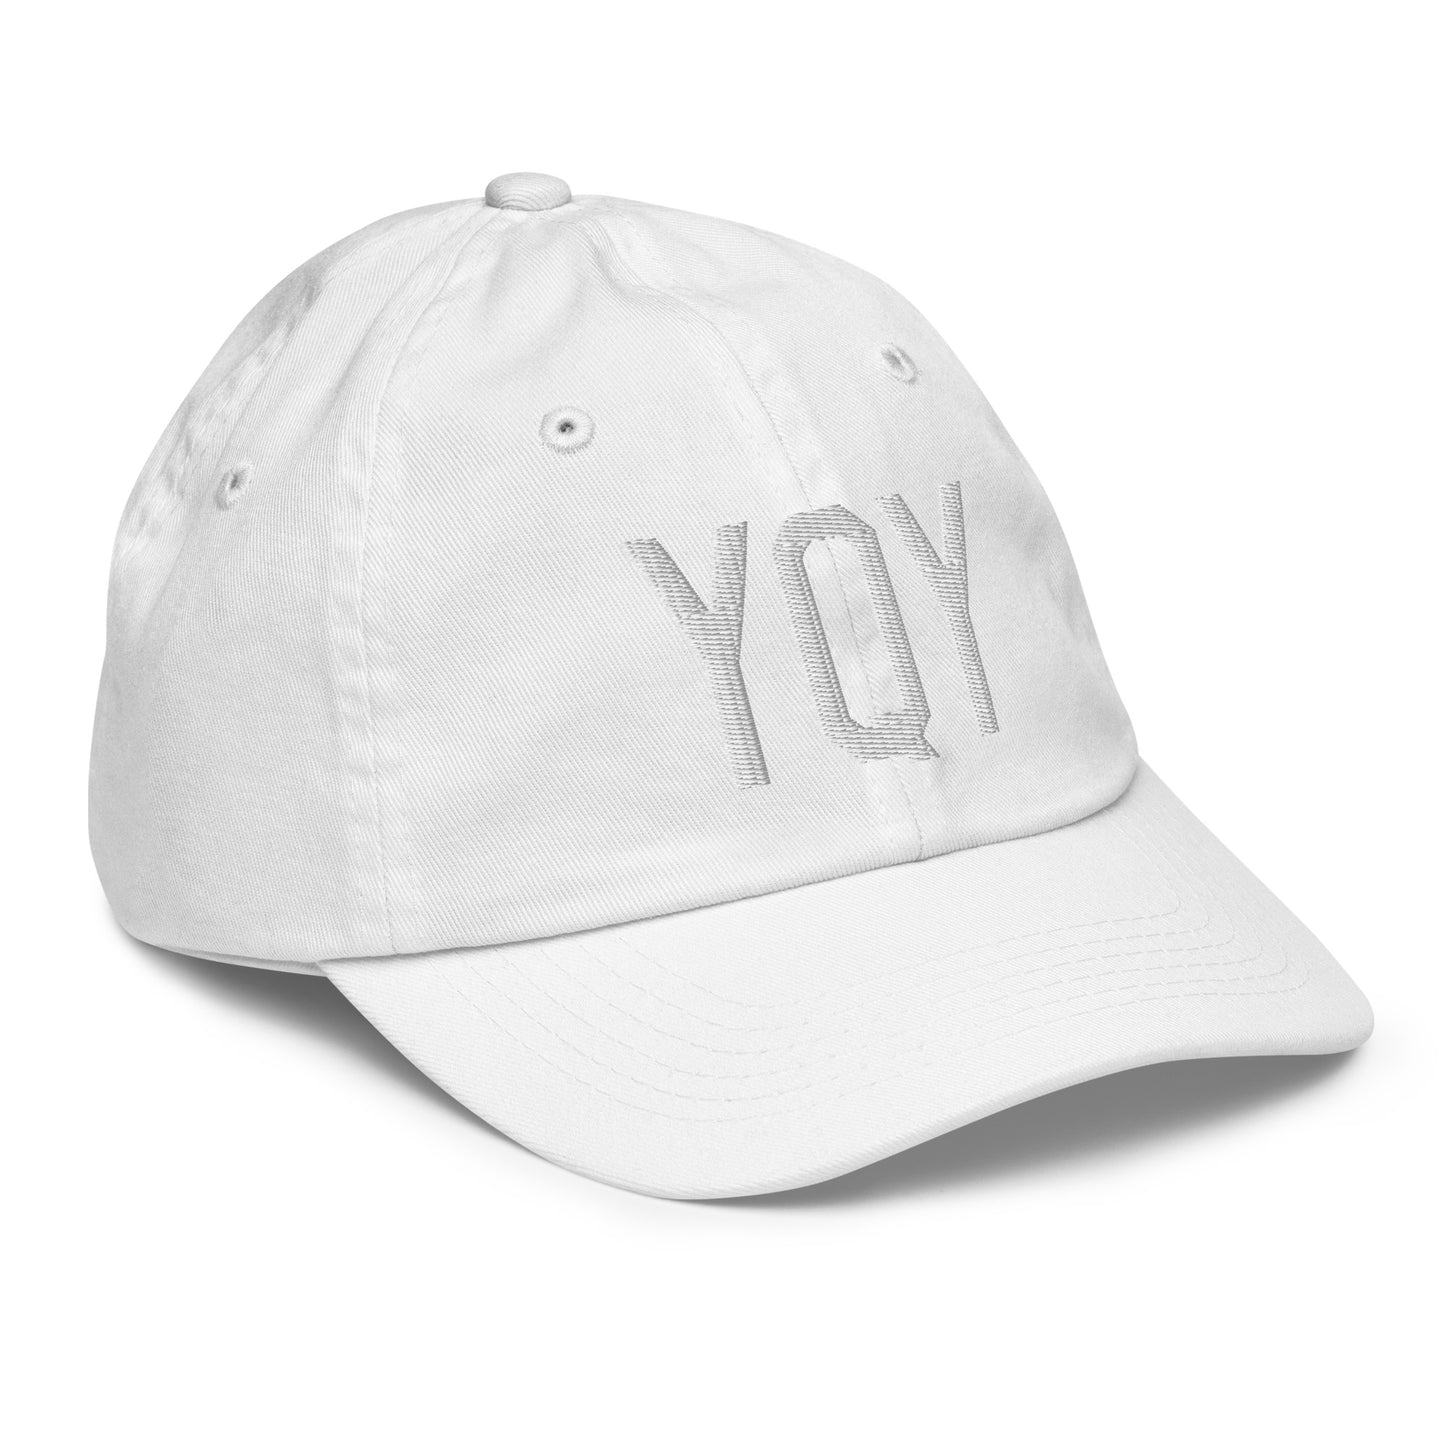 Airport Code Kid's Baseball Cap - White • YQY Sydney • YHM Designs - Image 35